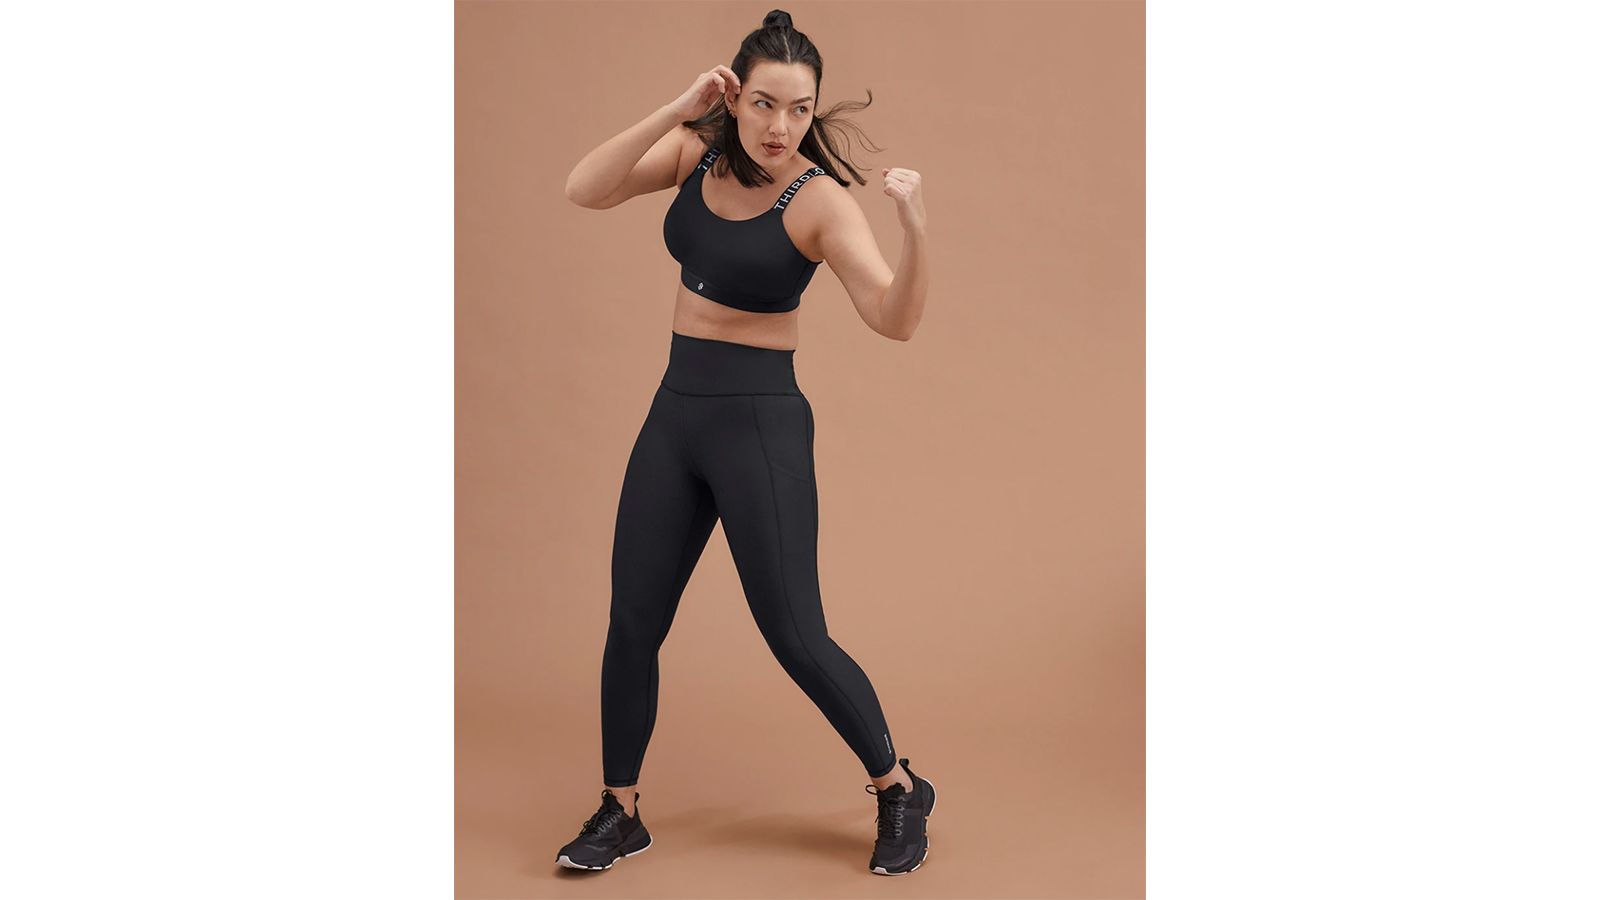 A Buttery Soft Legging: ThirdLove Muse Smoothing Legging